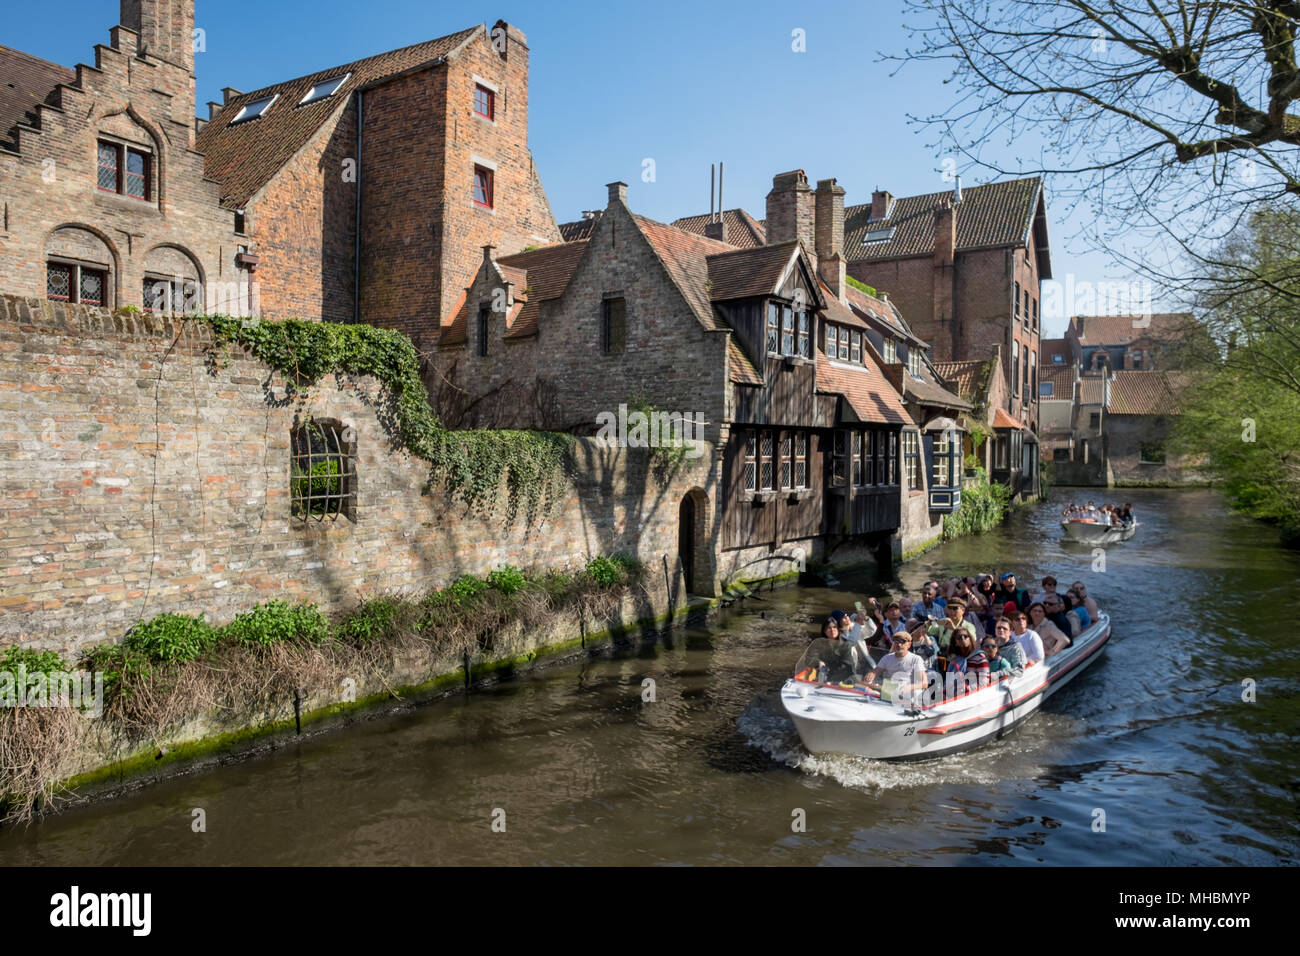 People enjoying a boat trip on one of the Canals of Bruges Stock Photo